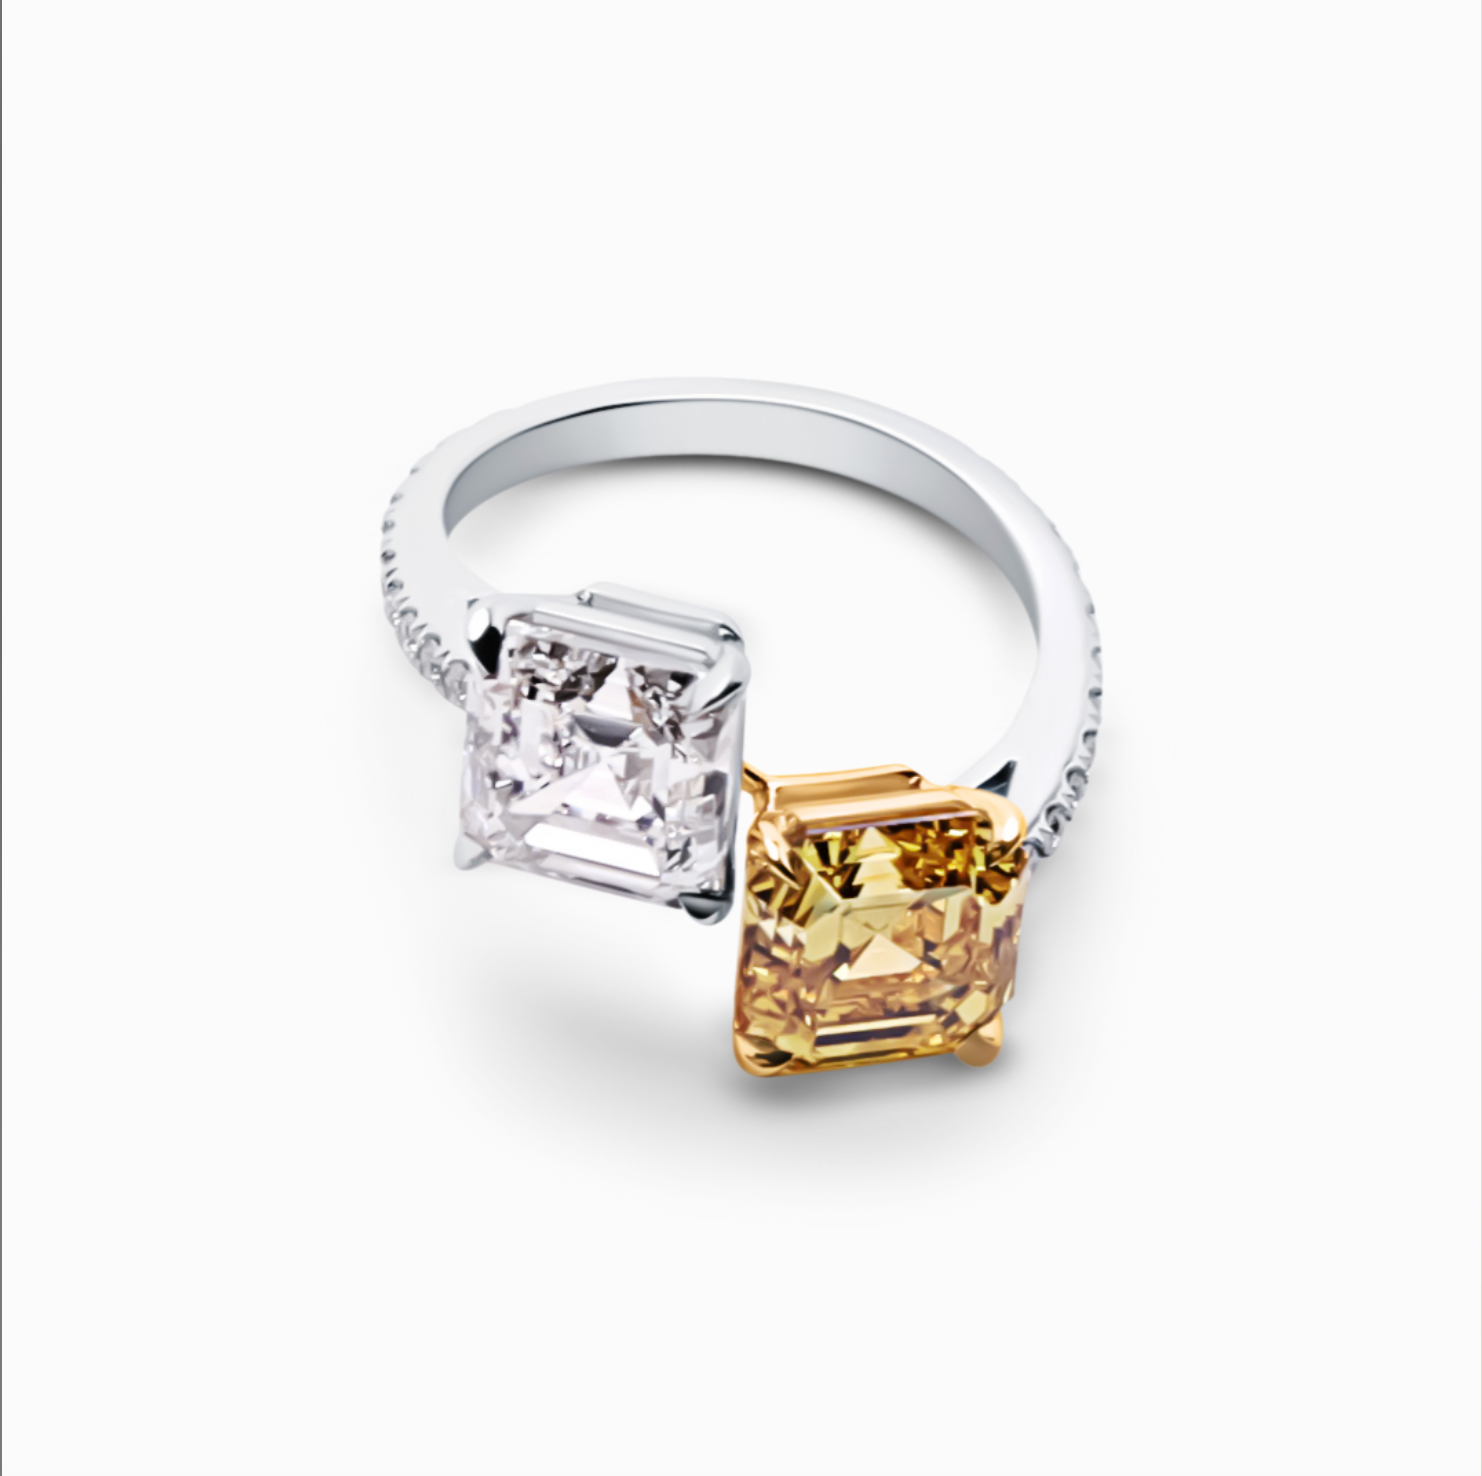 Fancy Yellow And Colorless Asscher Cut Engagement Ring